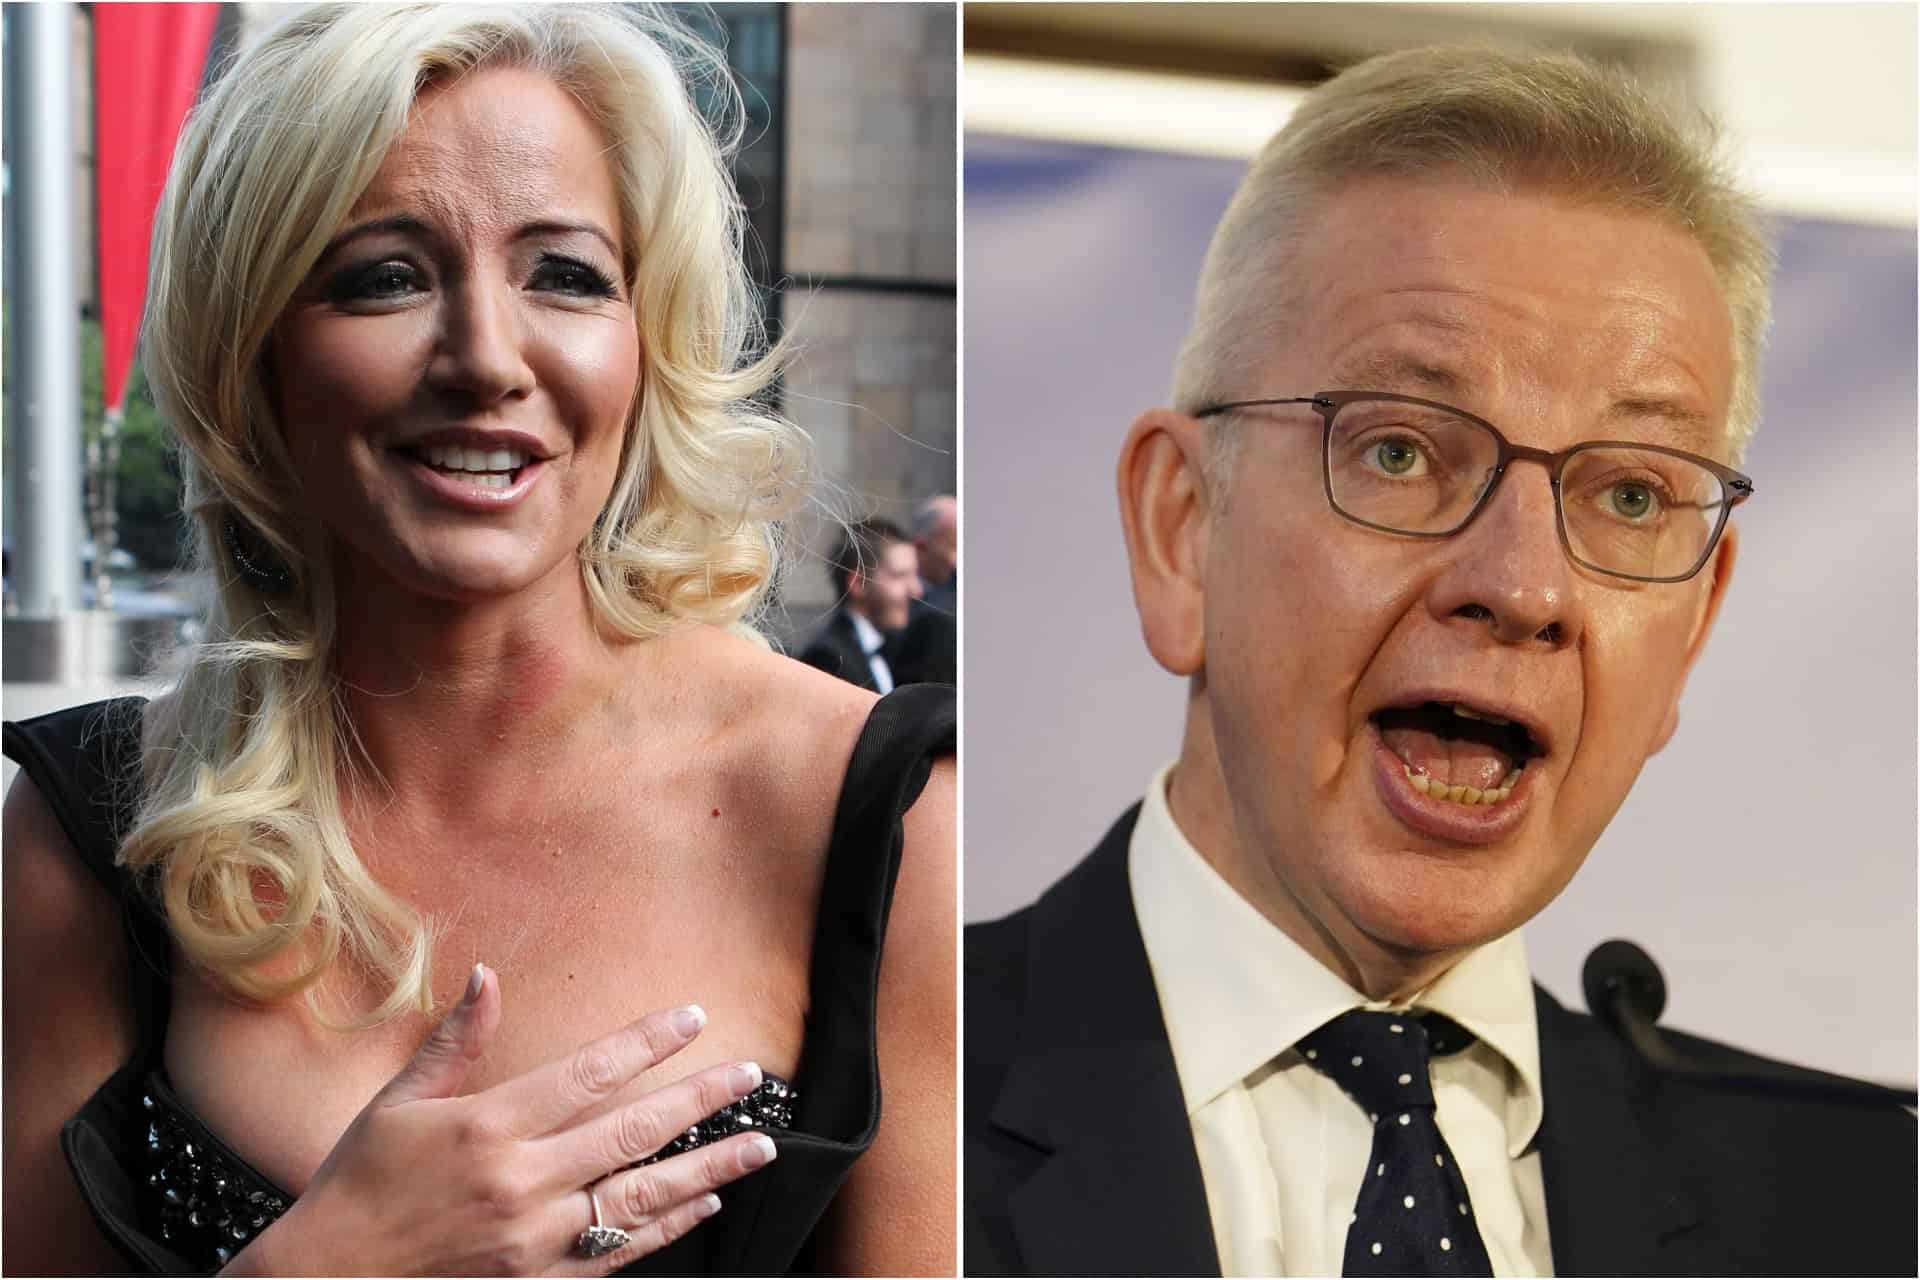 Gove hopes criminal case will be brought against Mone in PPE scandal